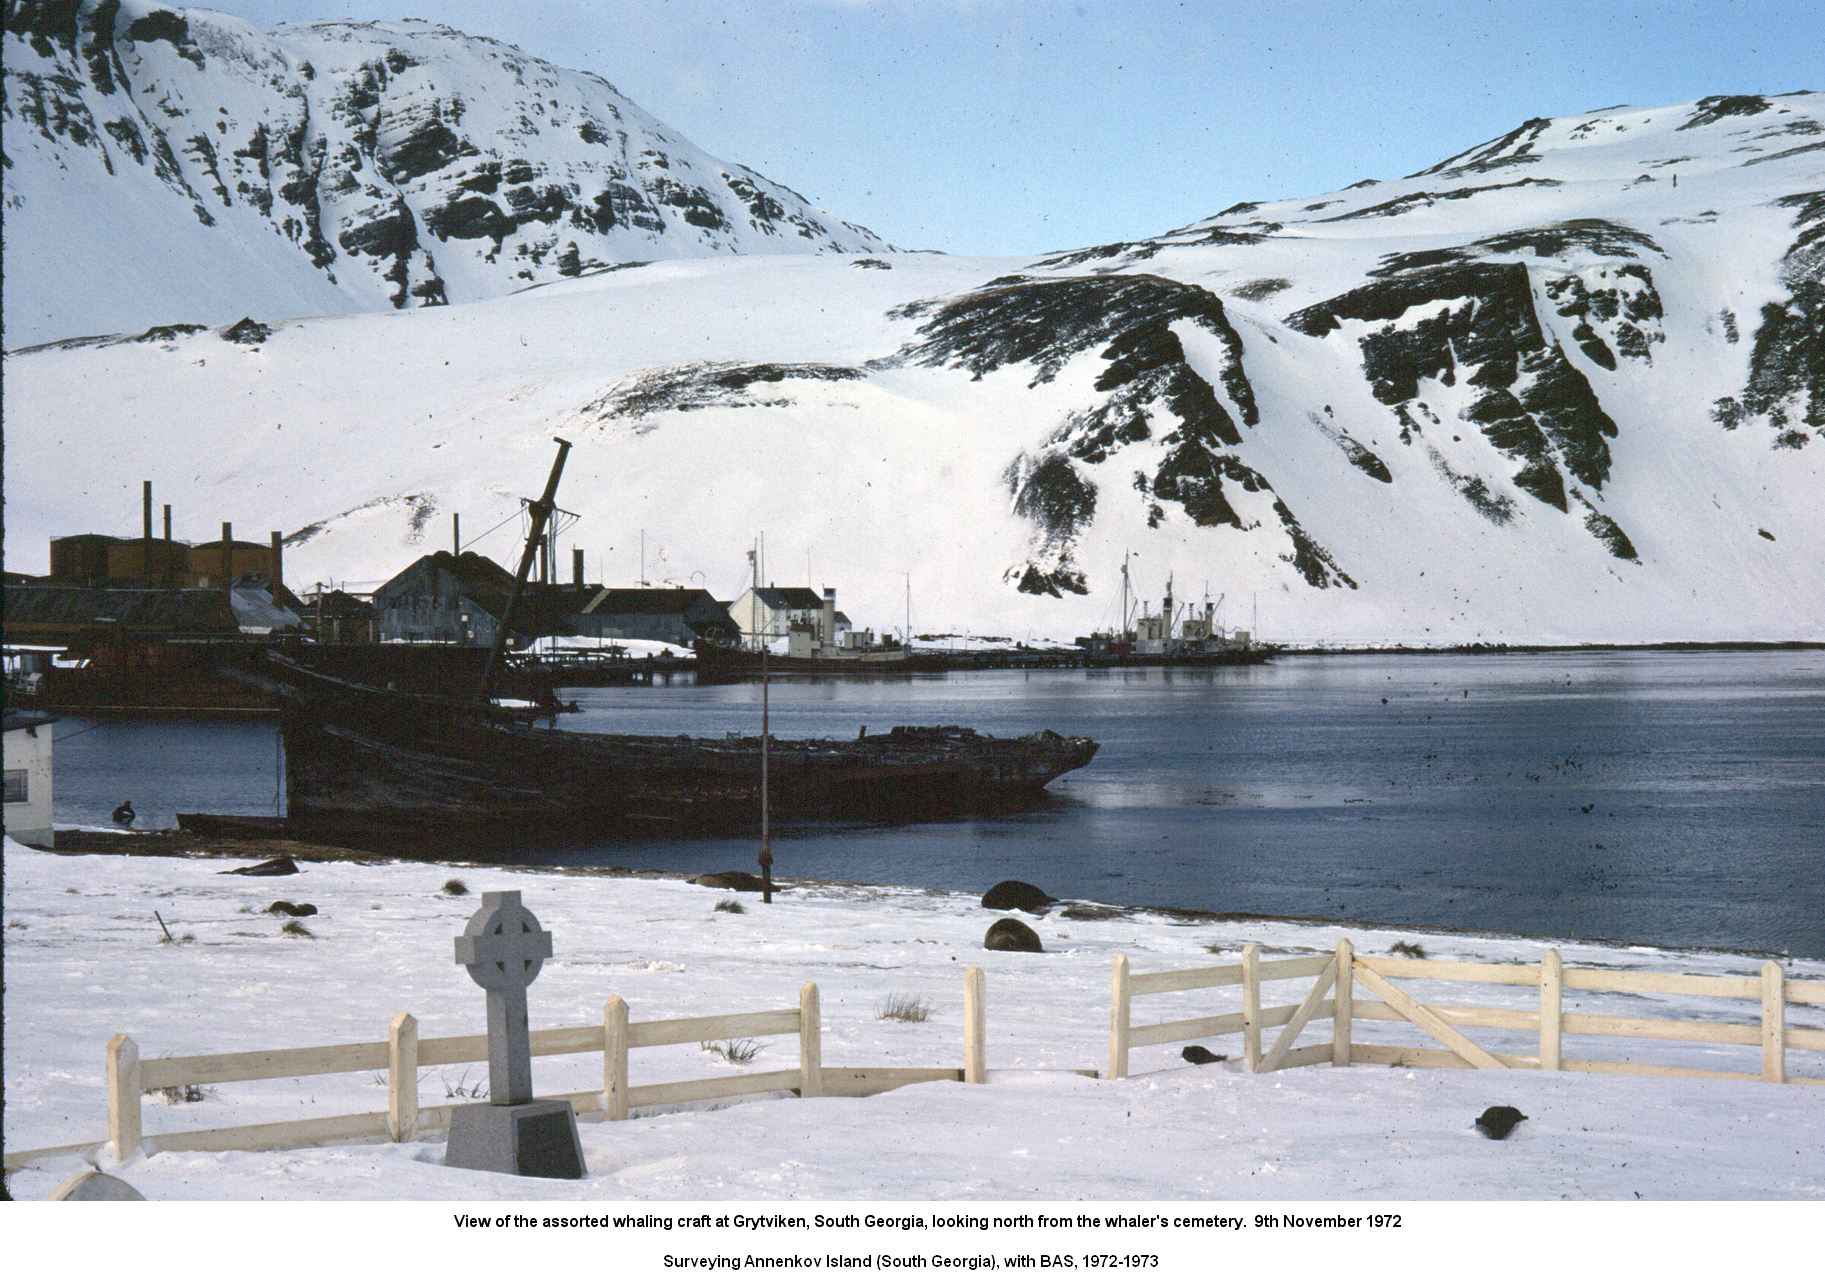 View of the assorted whaling craft at Grytviken, South Georgia, looking north from the whaler's cemetery.  9th November 1972.